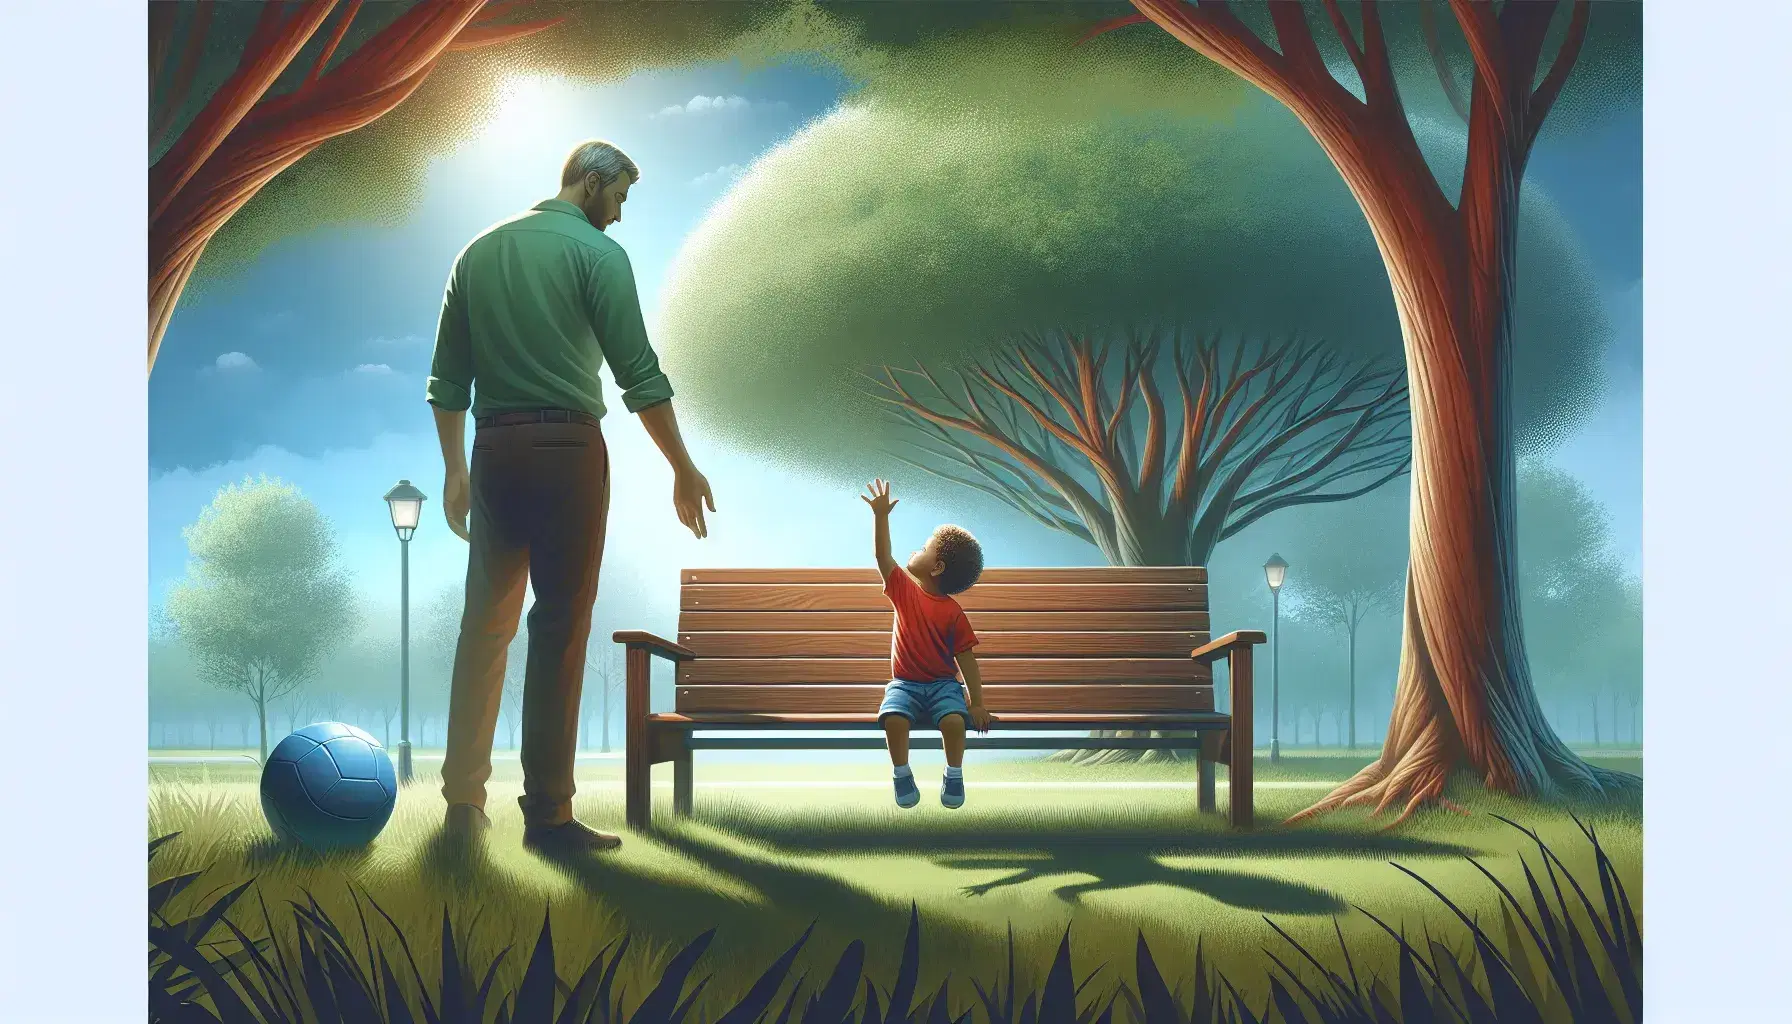 Child reaching for caregiver's hand in a tranquil park with a lush tree, empty bench, and blue ball on a sunny day, symbolizing nurturing relationships.